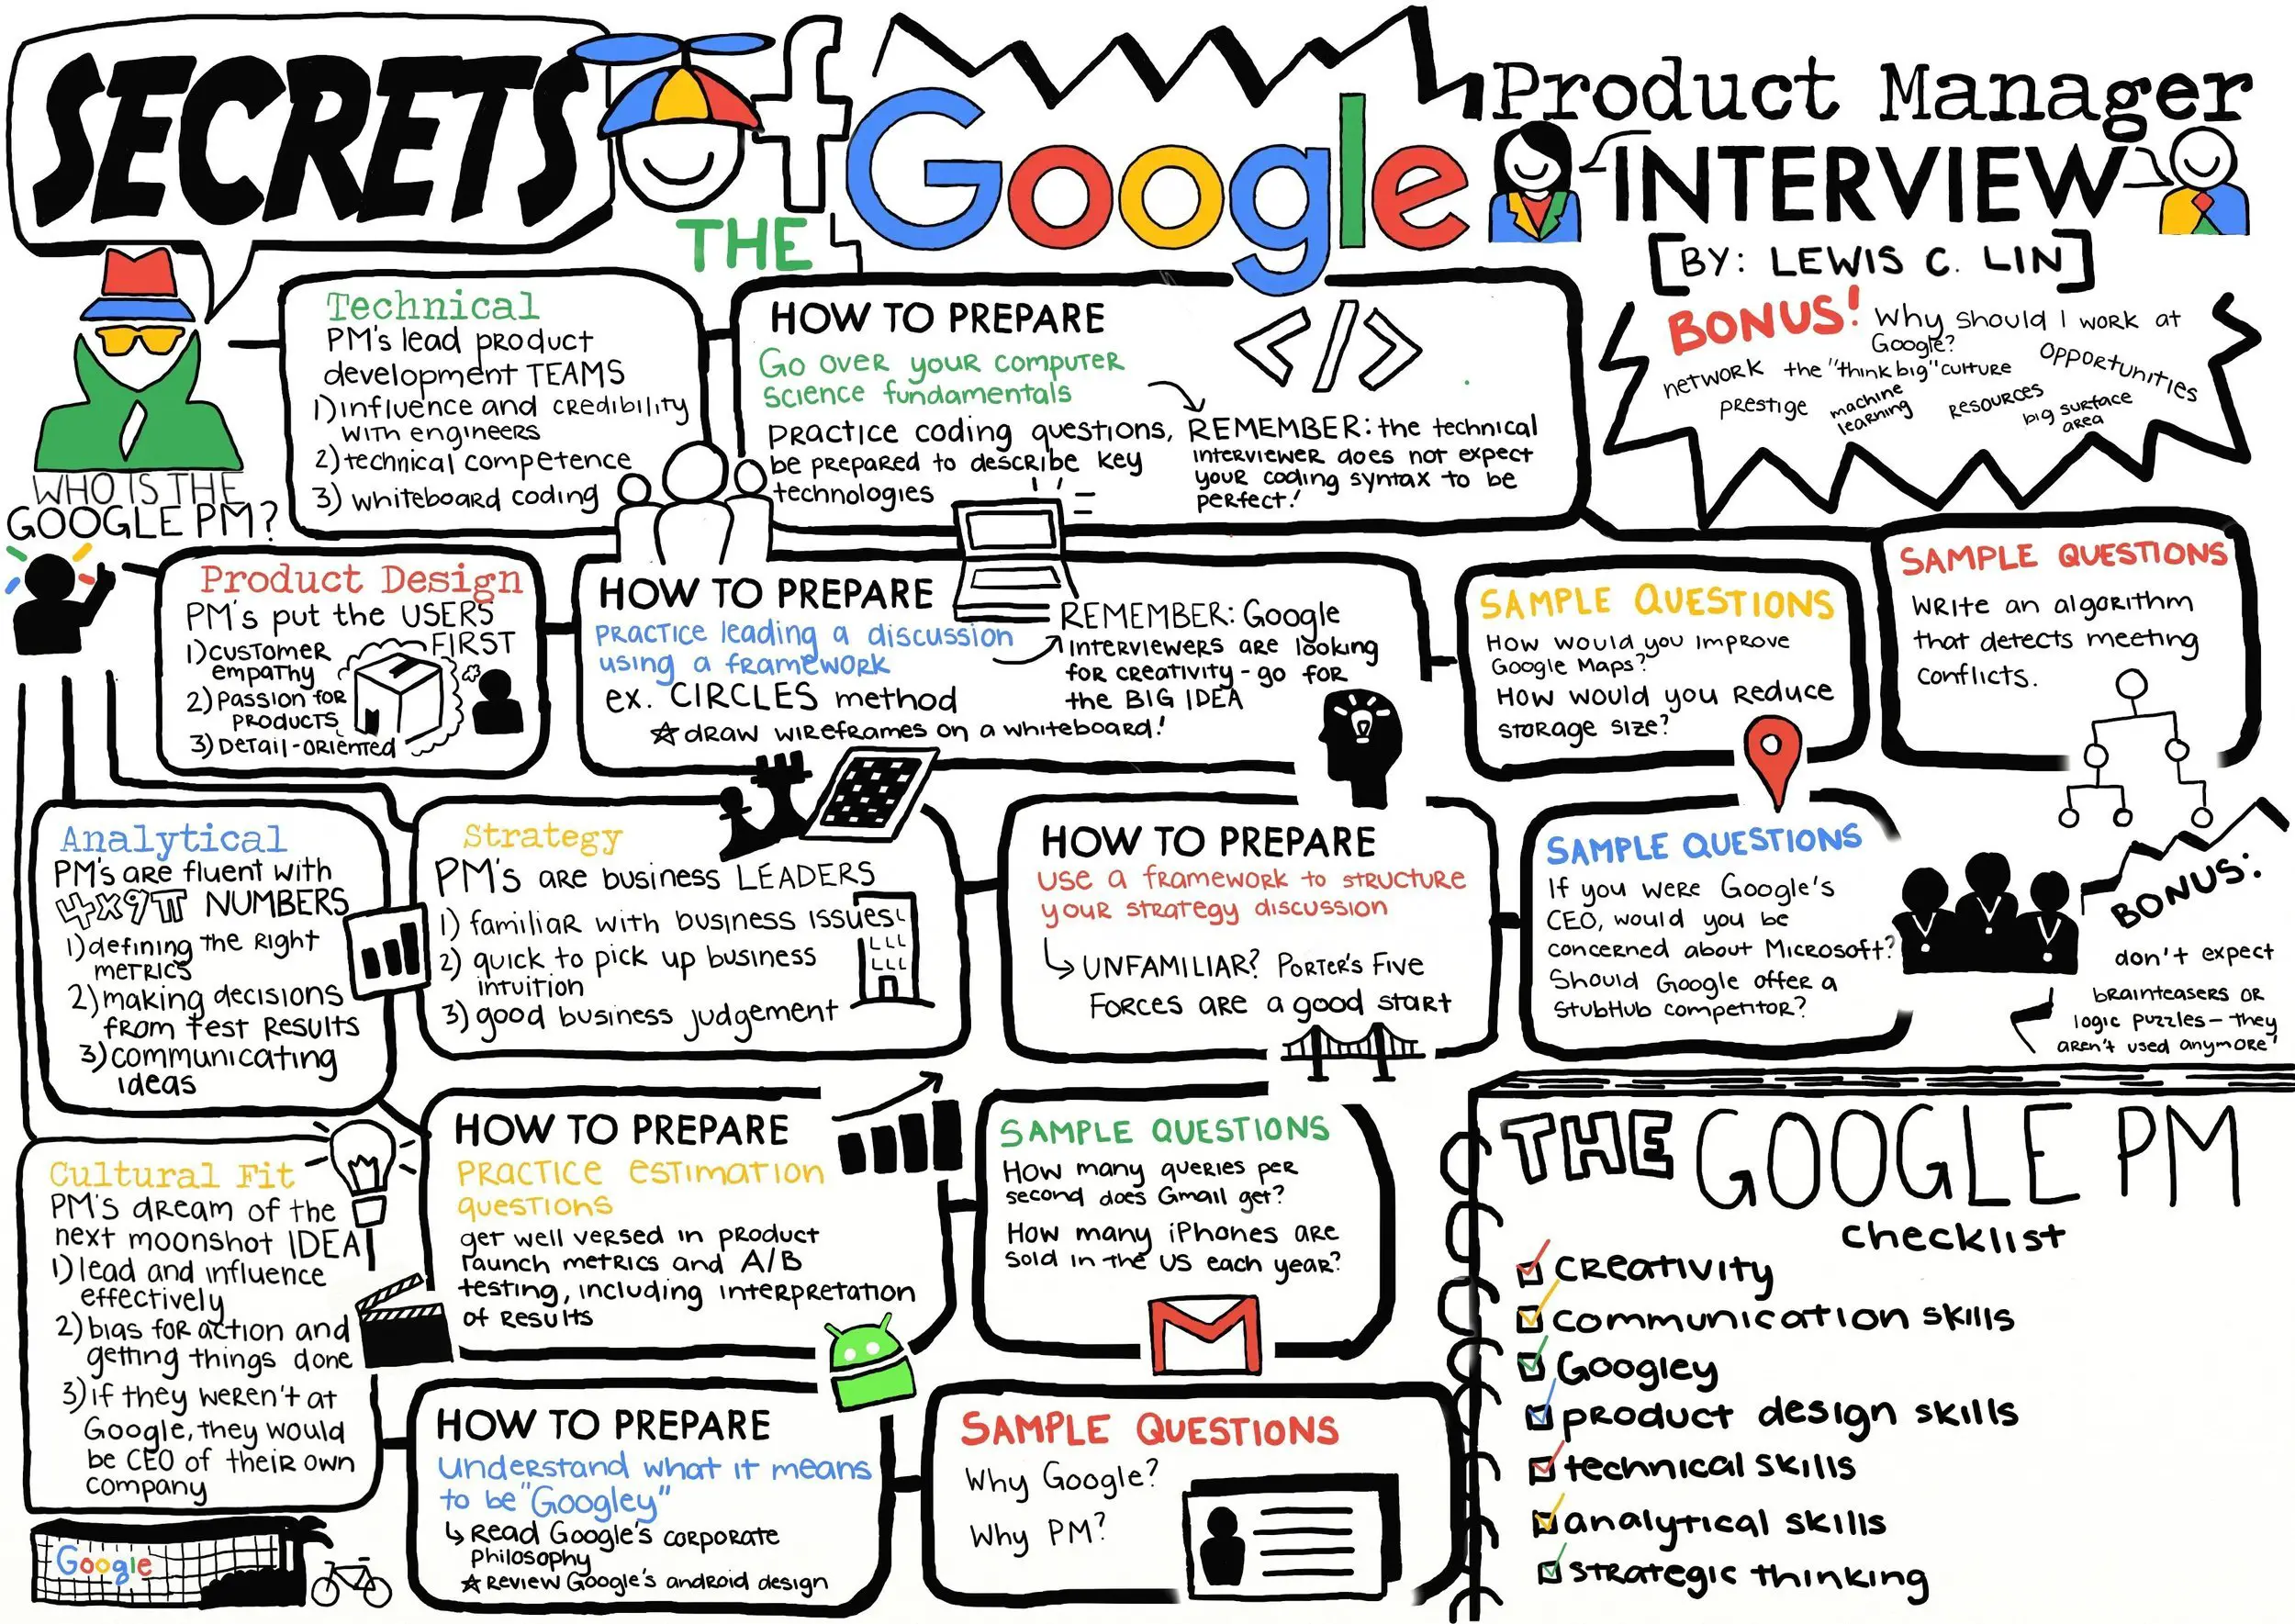 Google Product Manager Interview Cheat Sheet (PM or APM) â Lewis C. Lin